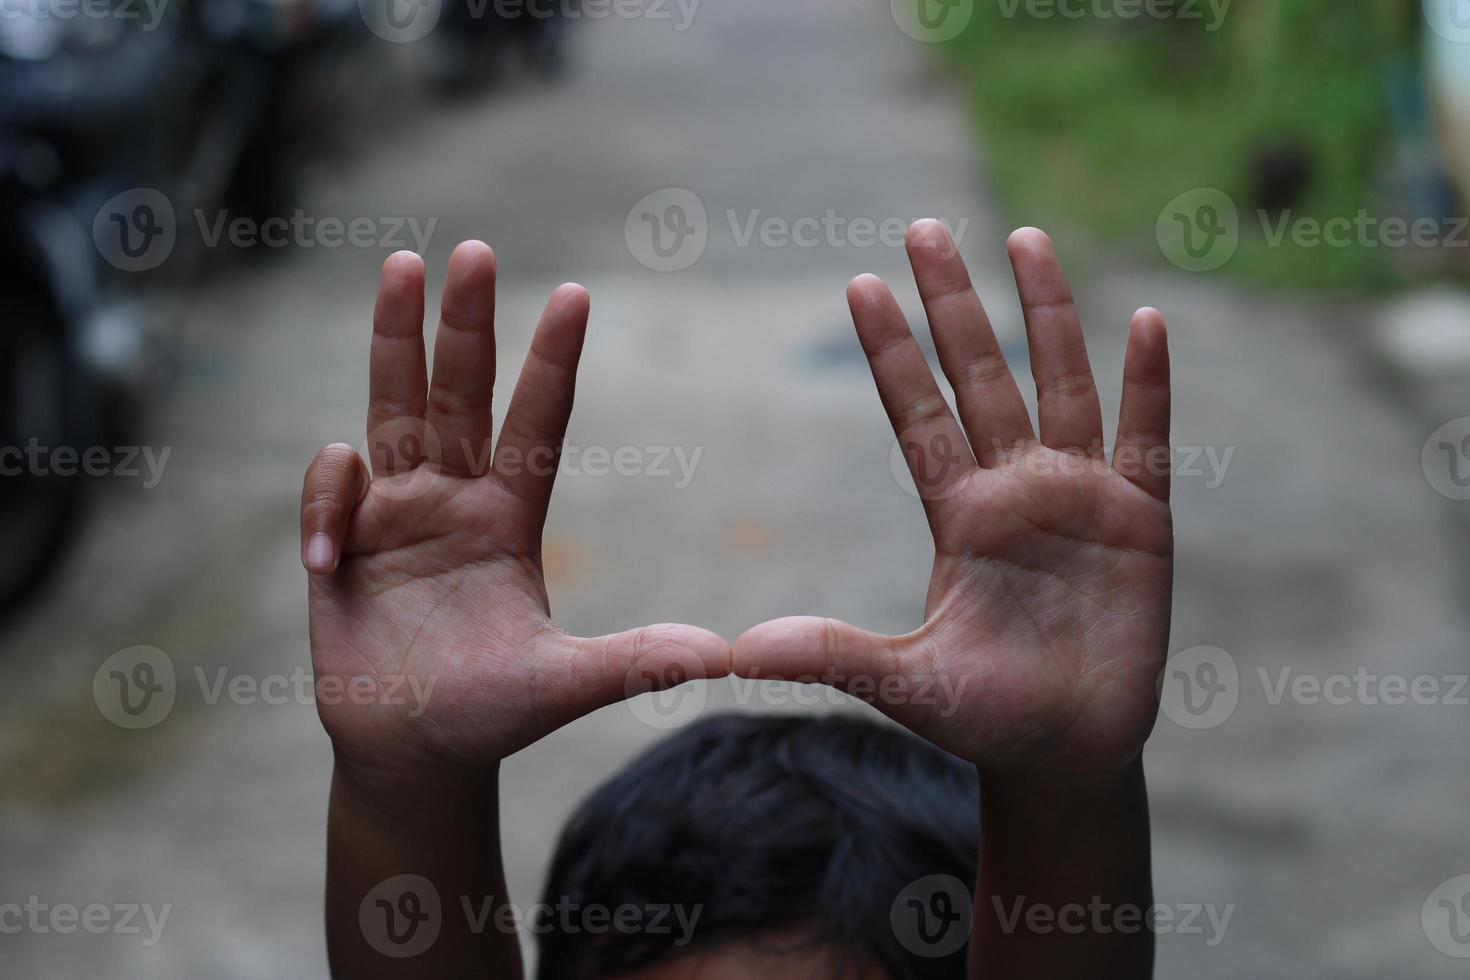 photo of hand waving outside the street